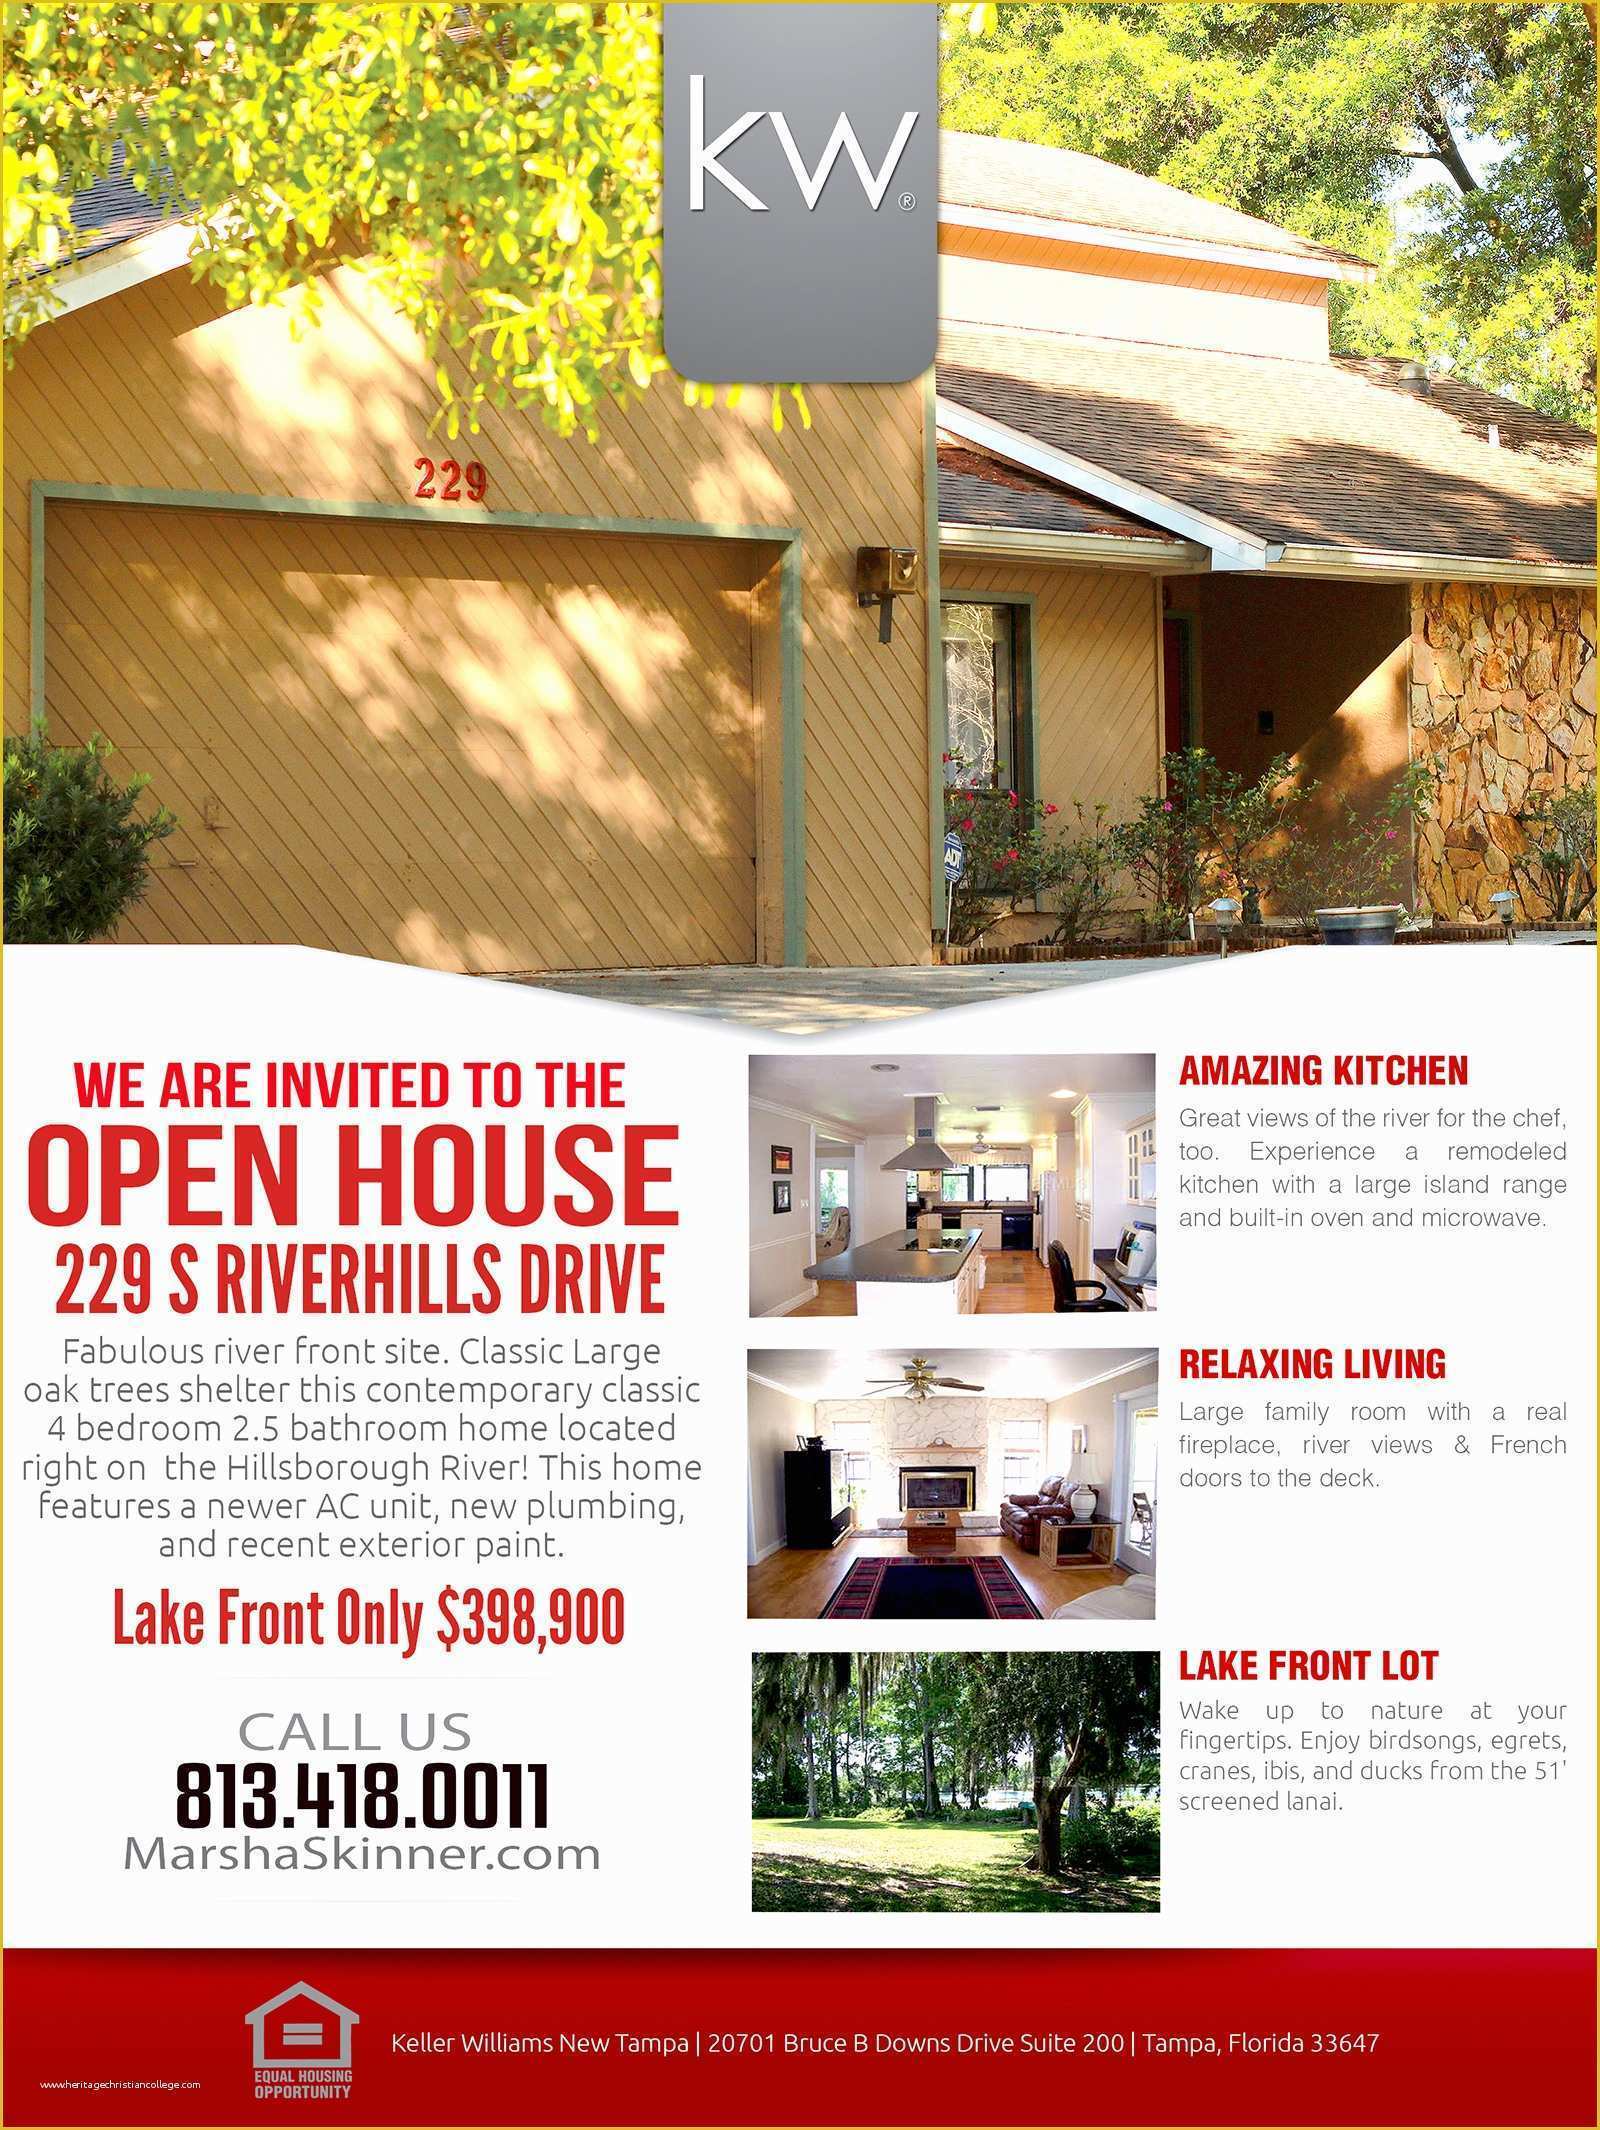 Free Open House Templates for Real Estate Of Real Estate Open House Flyer Portablegasgrillweber